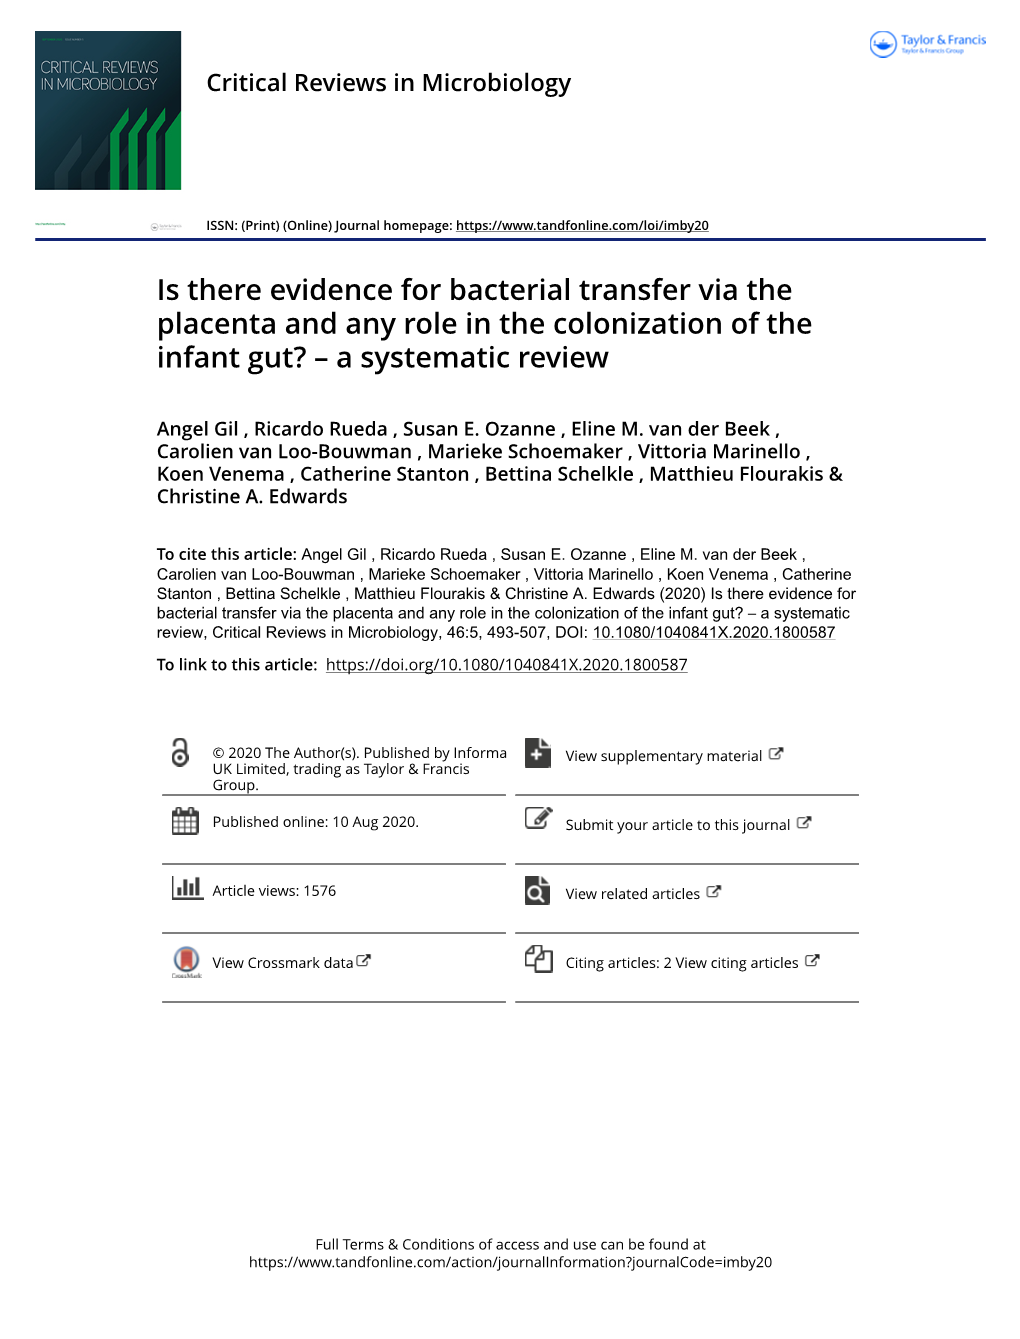 Is There Evidence for Bacterial Transfer Via the Placenta and Any Role in the Colonization of the Infant Gut? – a Systematic Review